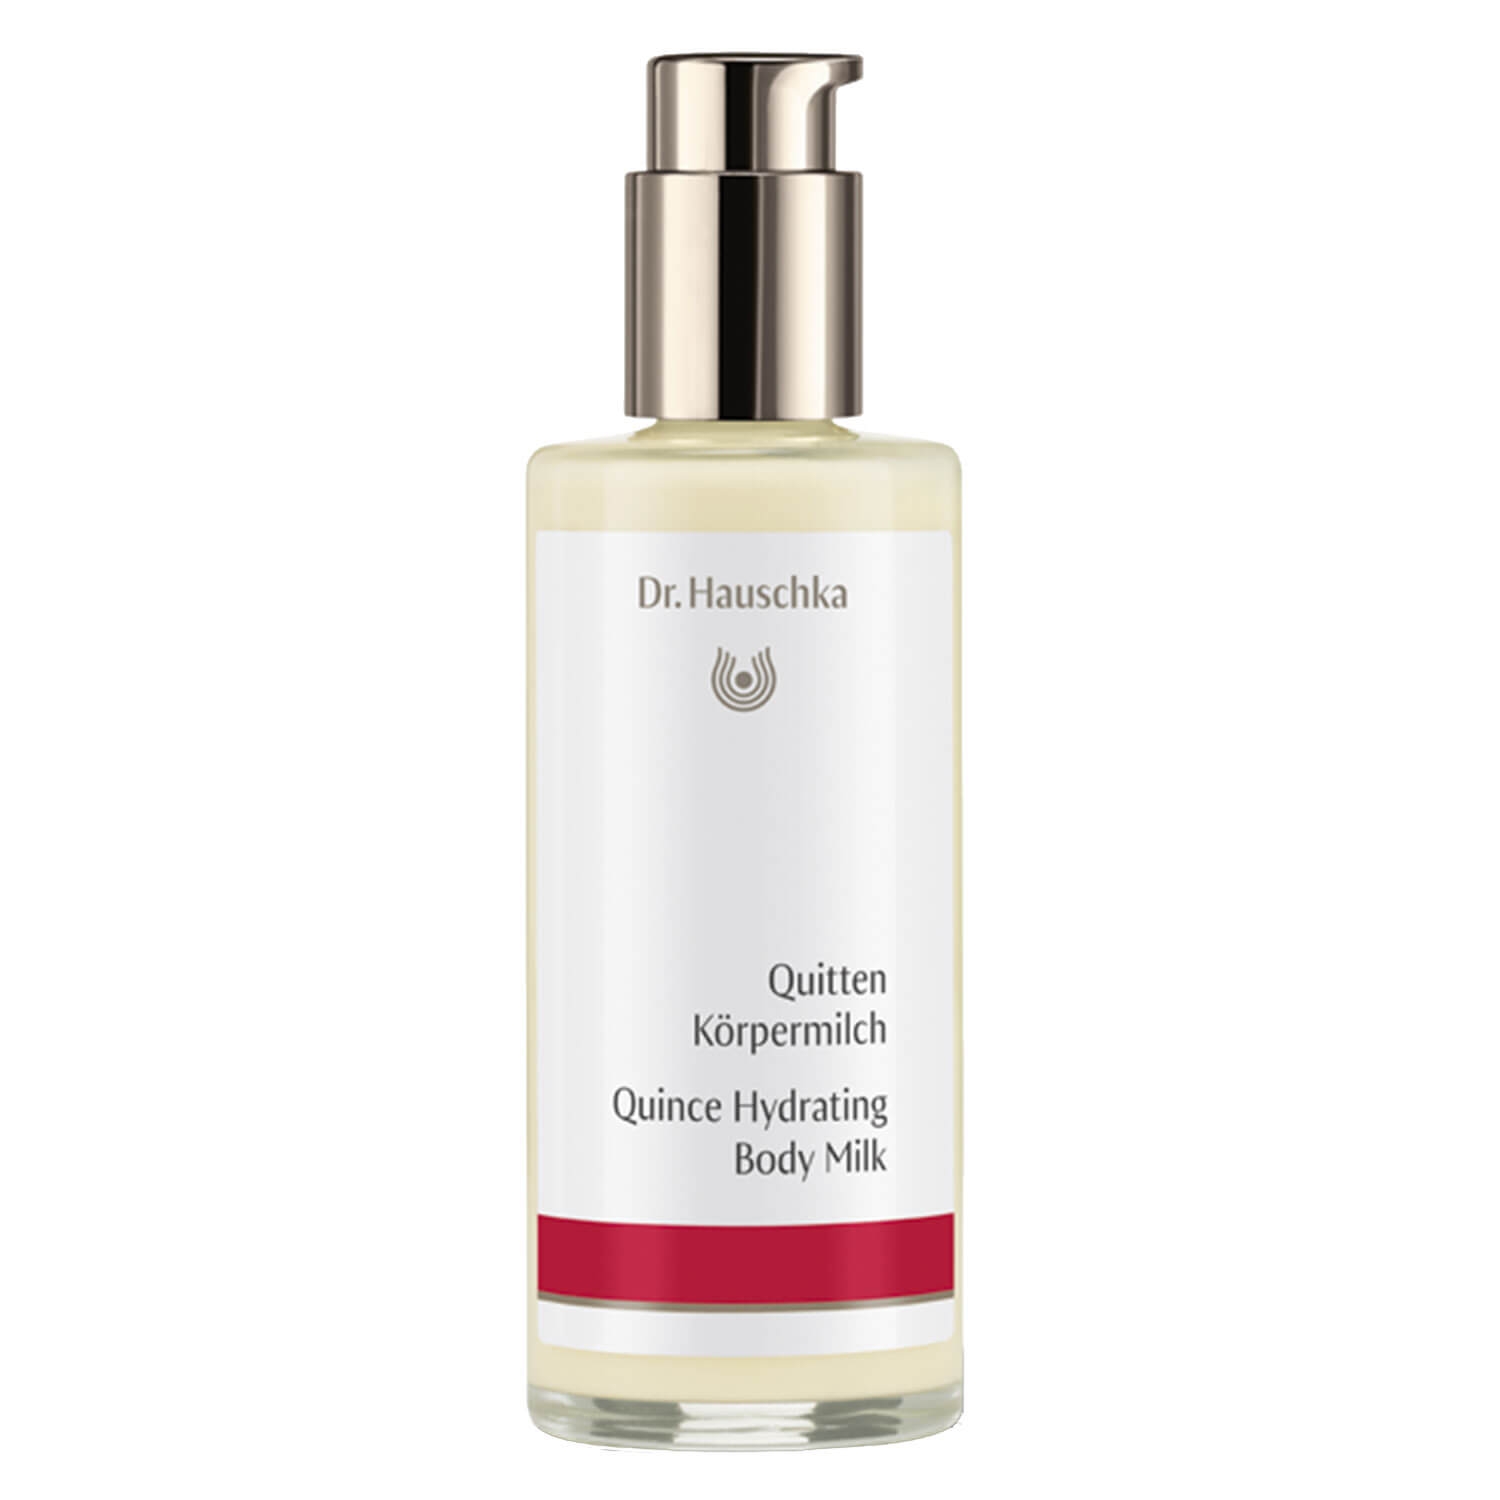 Product image from Dr. Hauschka - Quitten Körpermilch